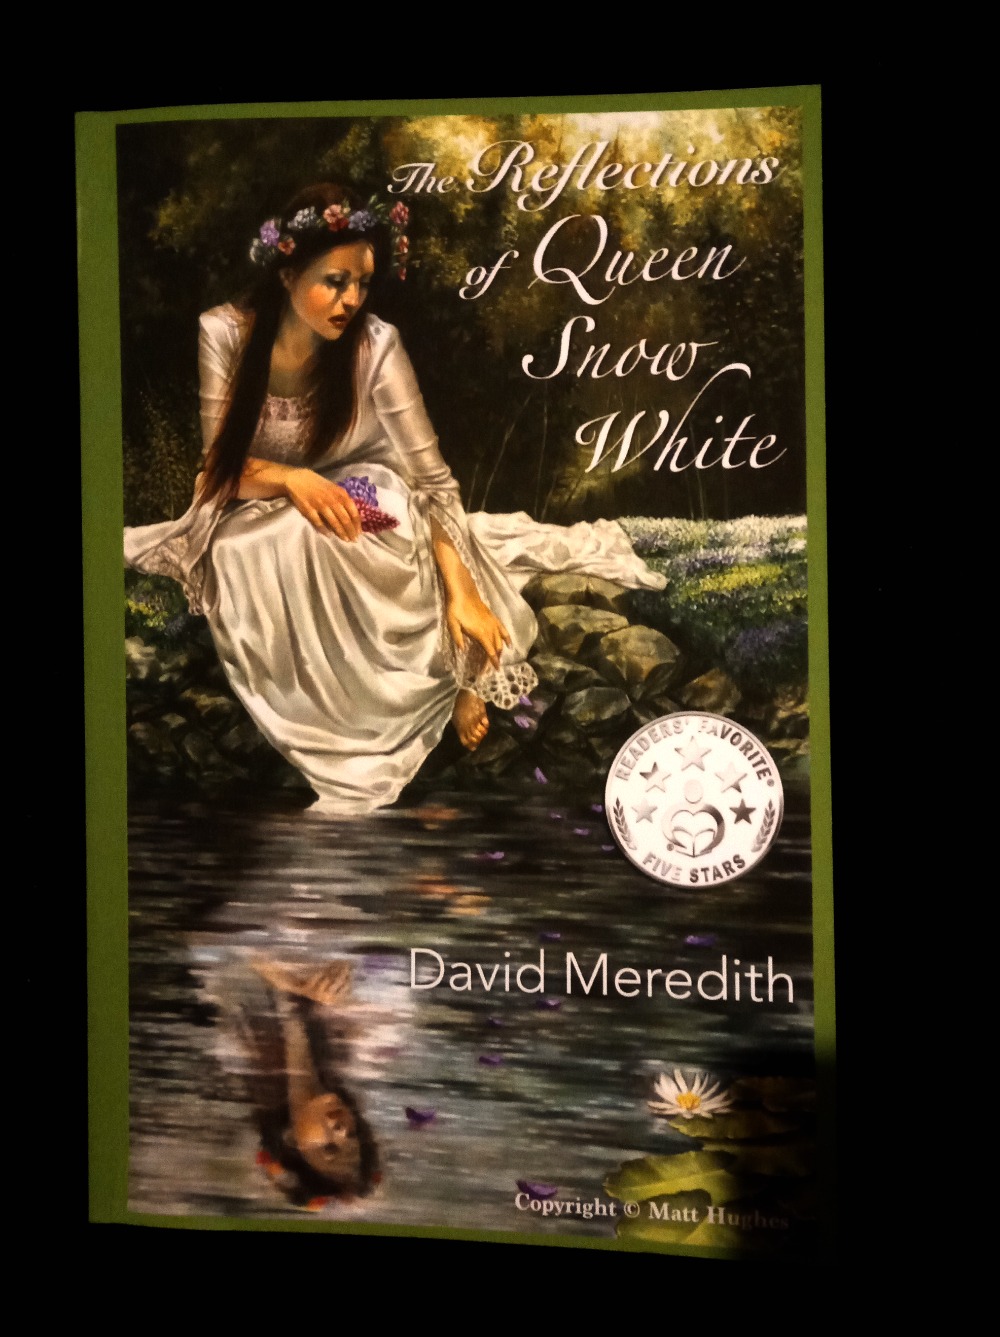 The Reflections of Queen Snow White by David Meredith - Book Cover